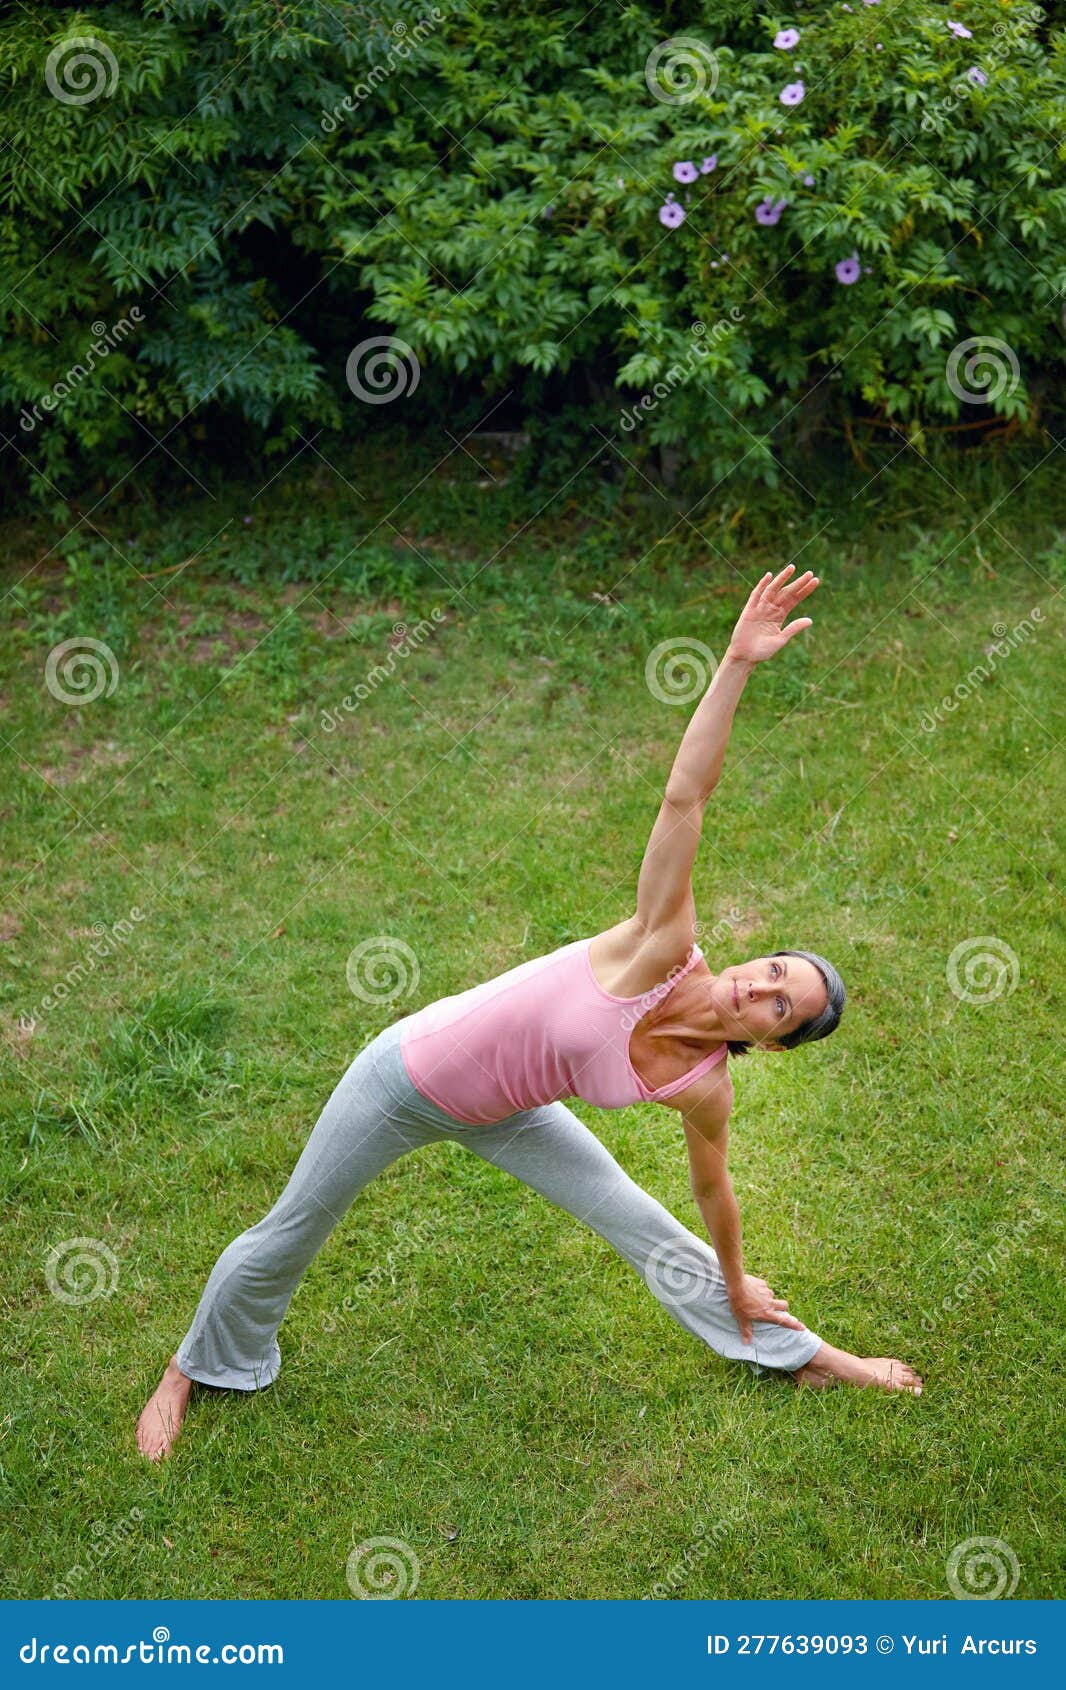 Become the Triangle. a Mature Woman Doing the Extended Triangle Yoga ...